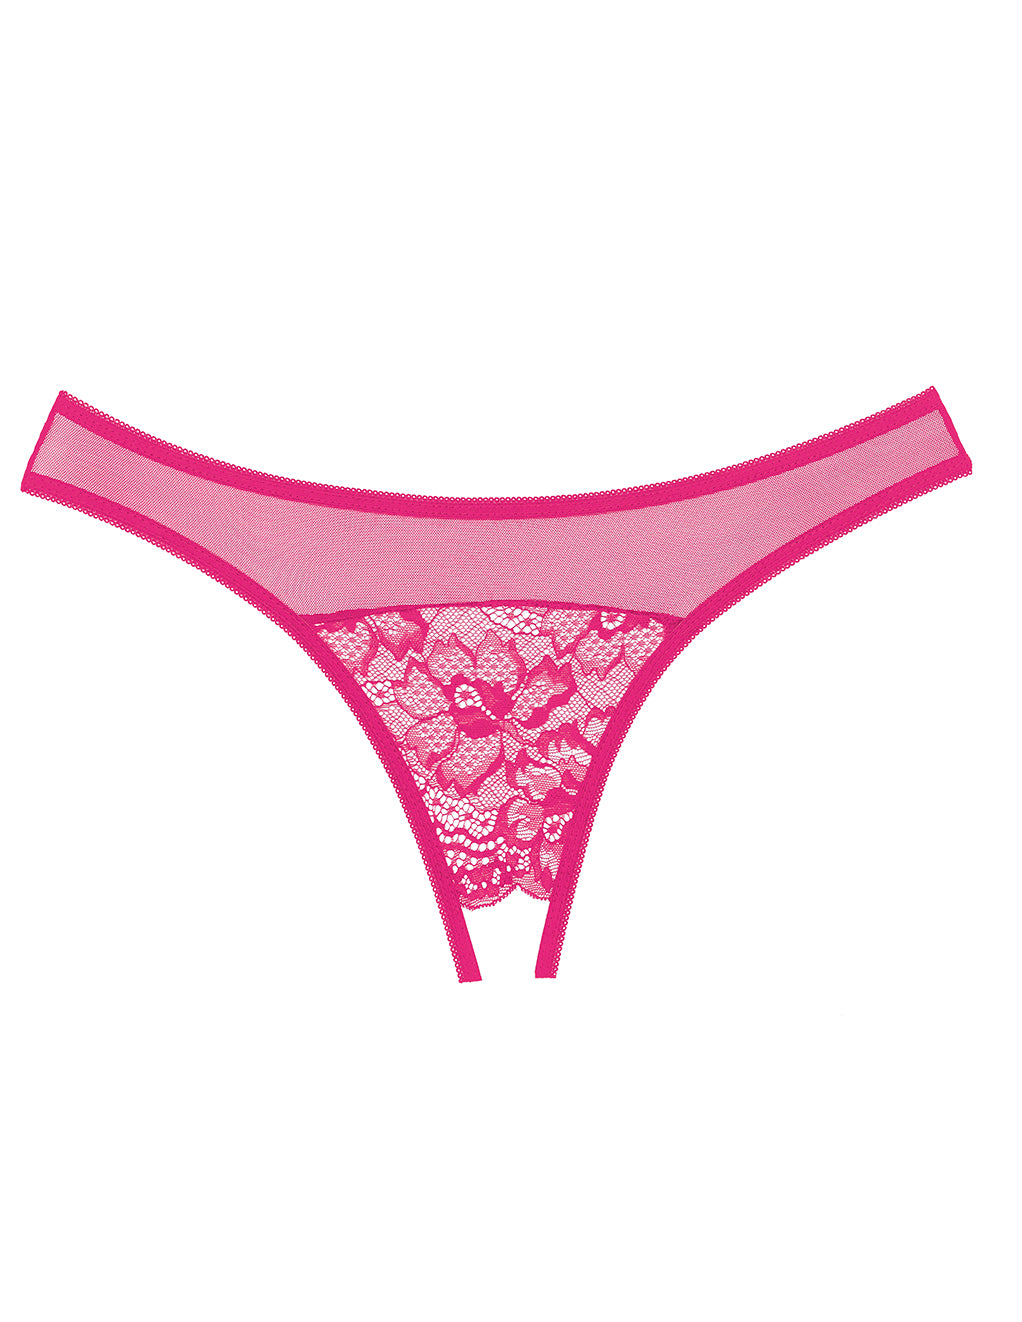 Allure Lingerie Floral Lace Crotchless Panty- Hot Pink- Front